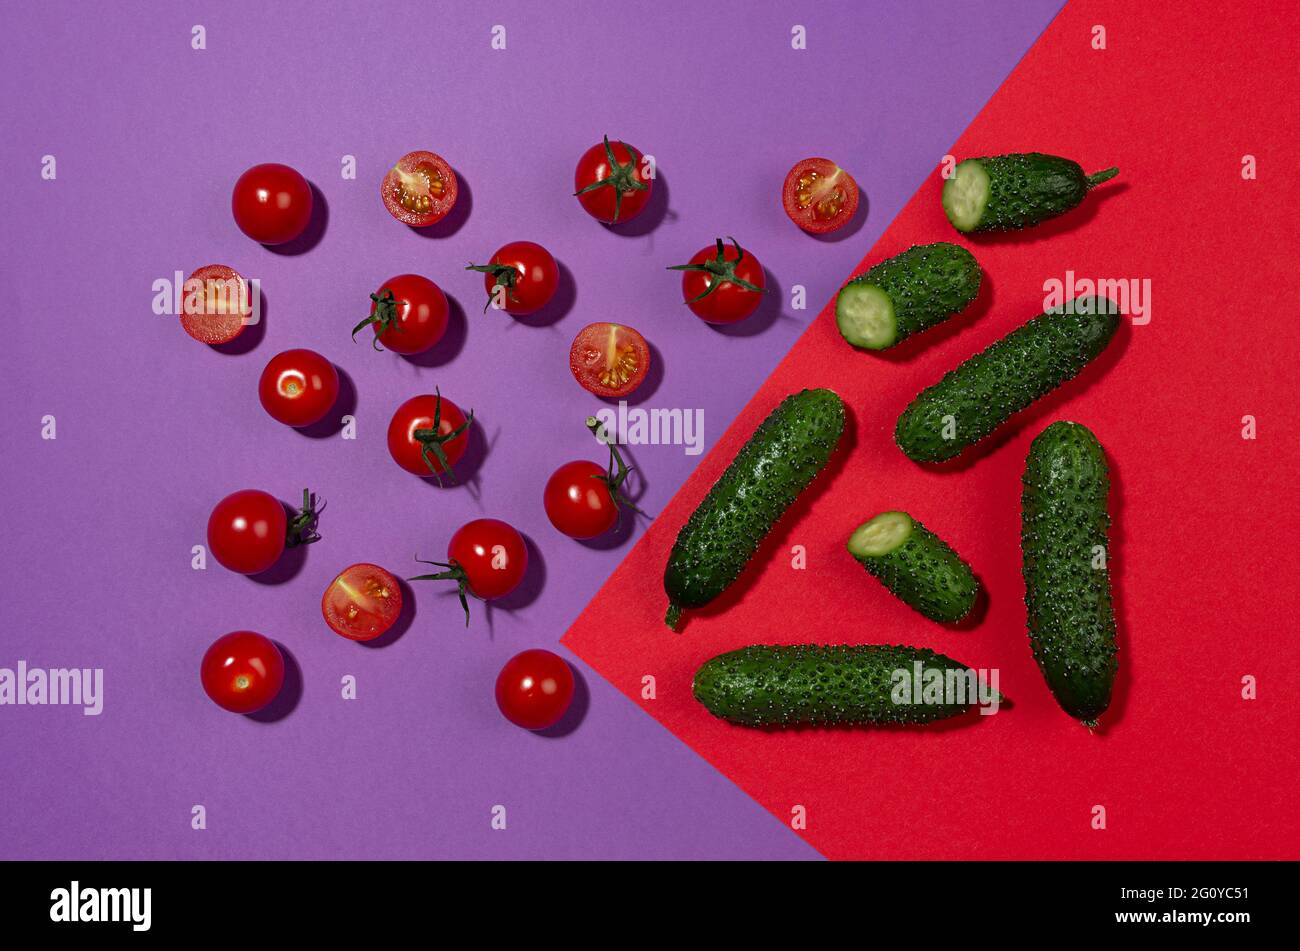 Juicy red tomato, green young cucumber with shadow on contrast red and purple background. Modern food pattern, top view. Stock Photo